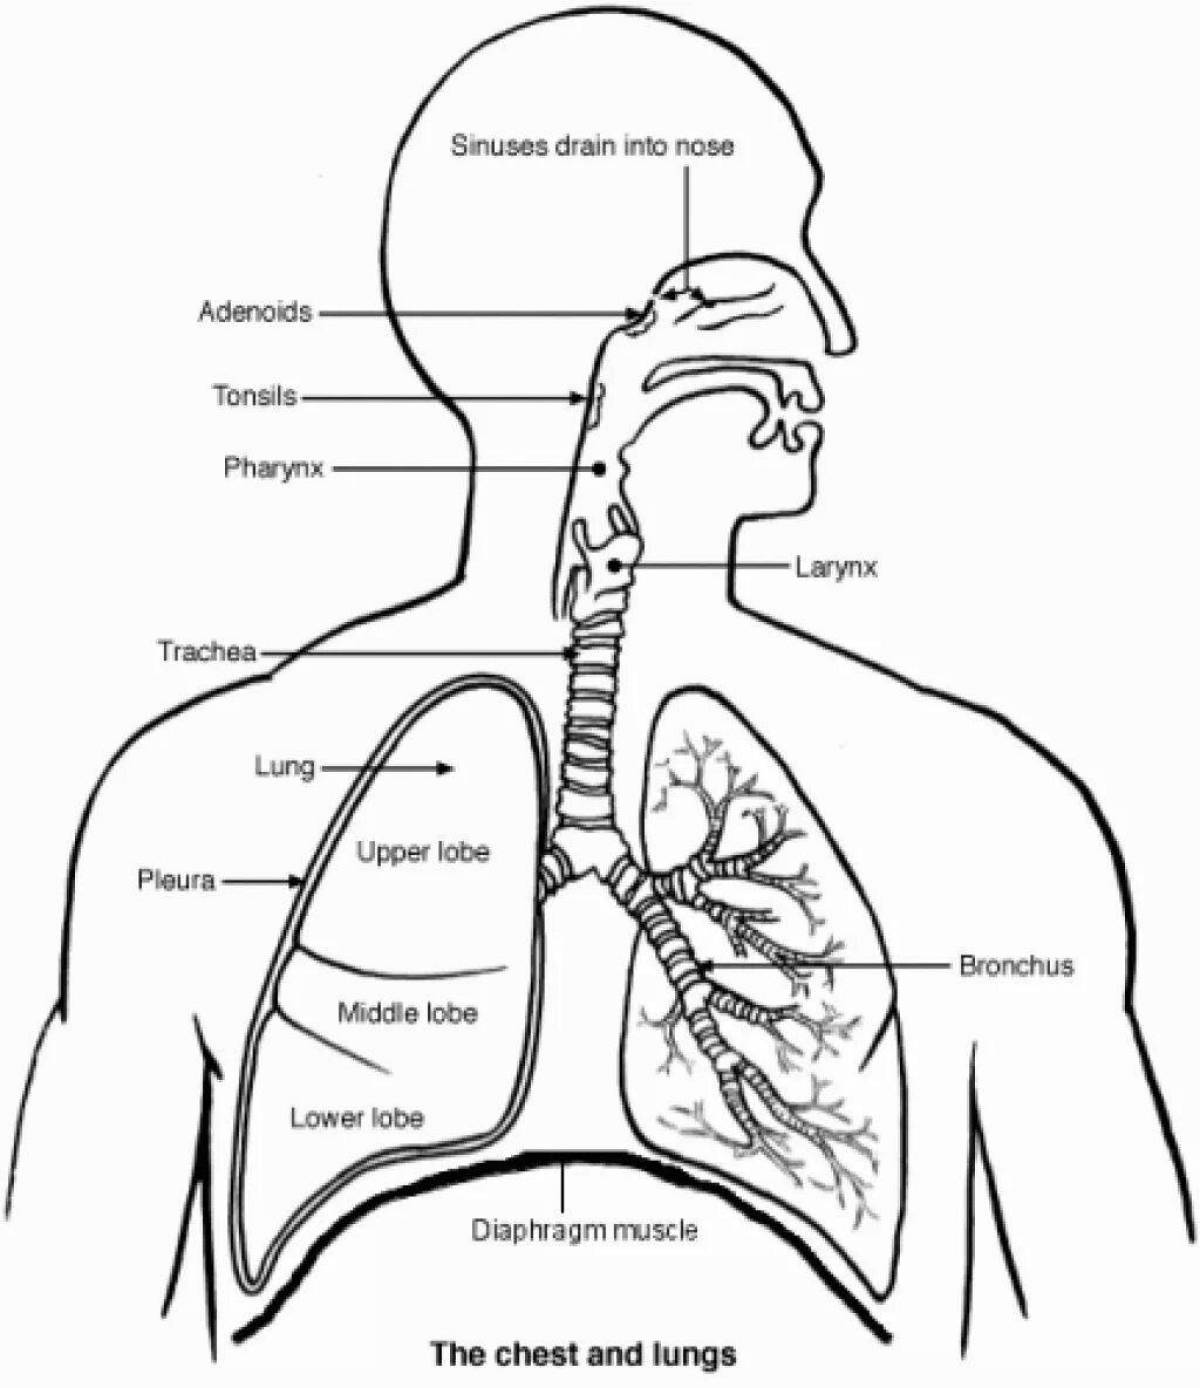 Coloring book educational respiratory system